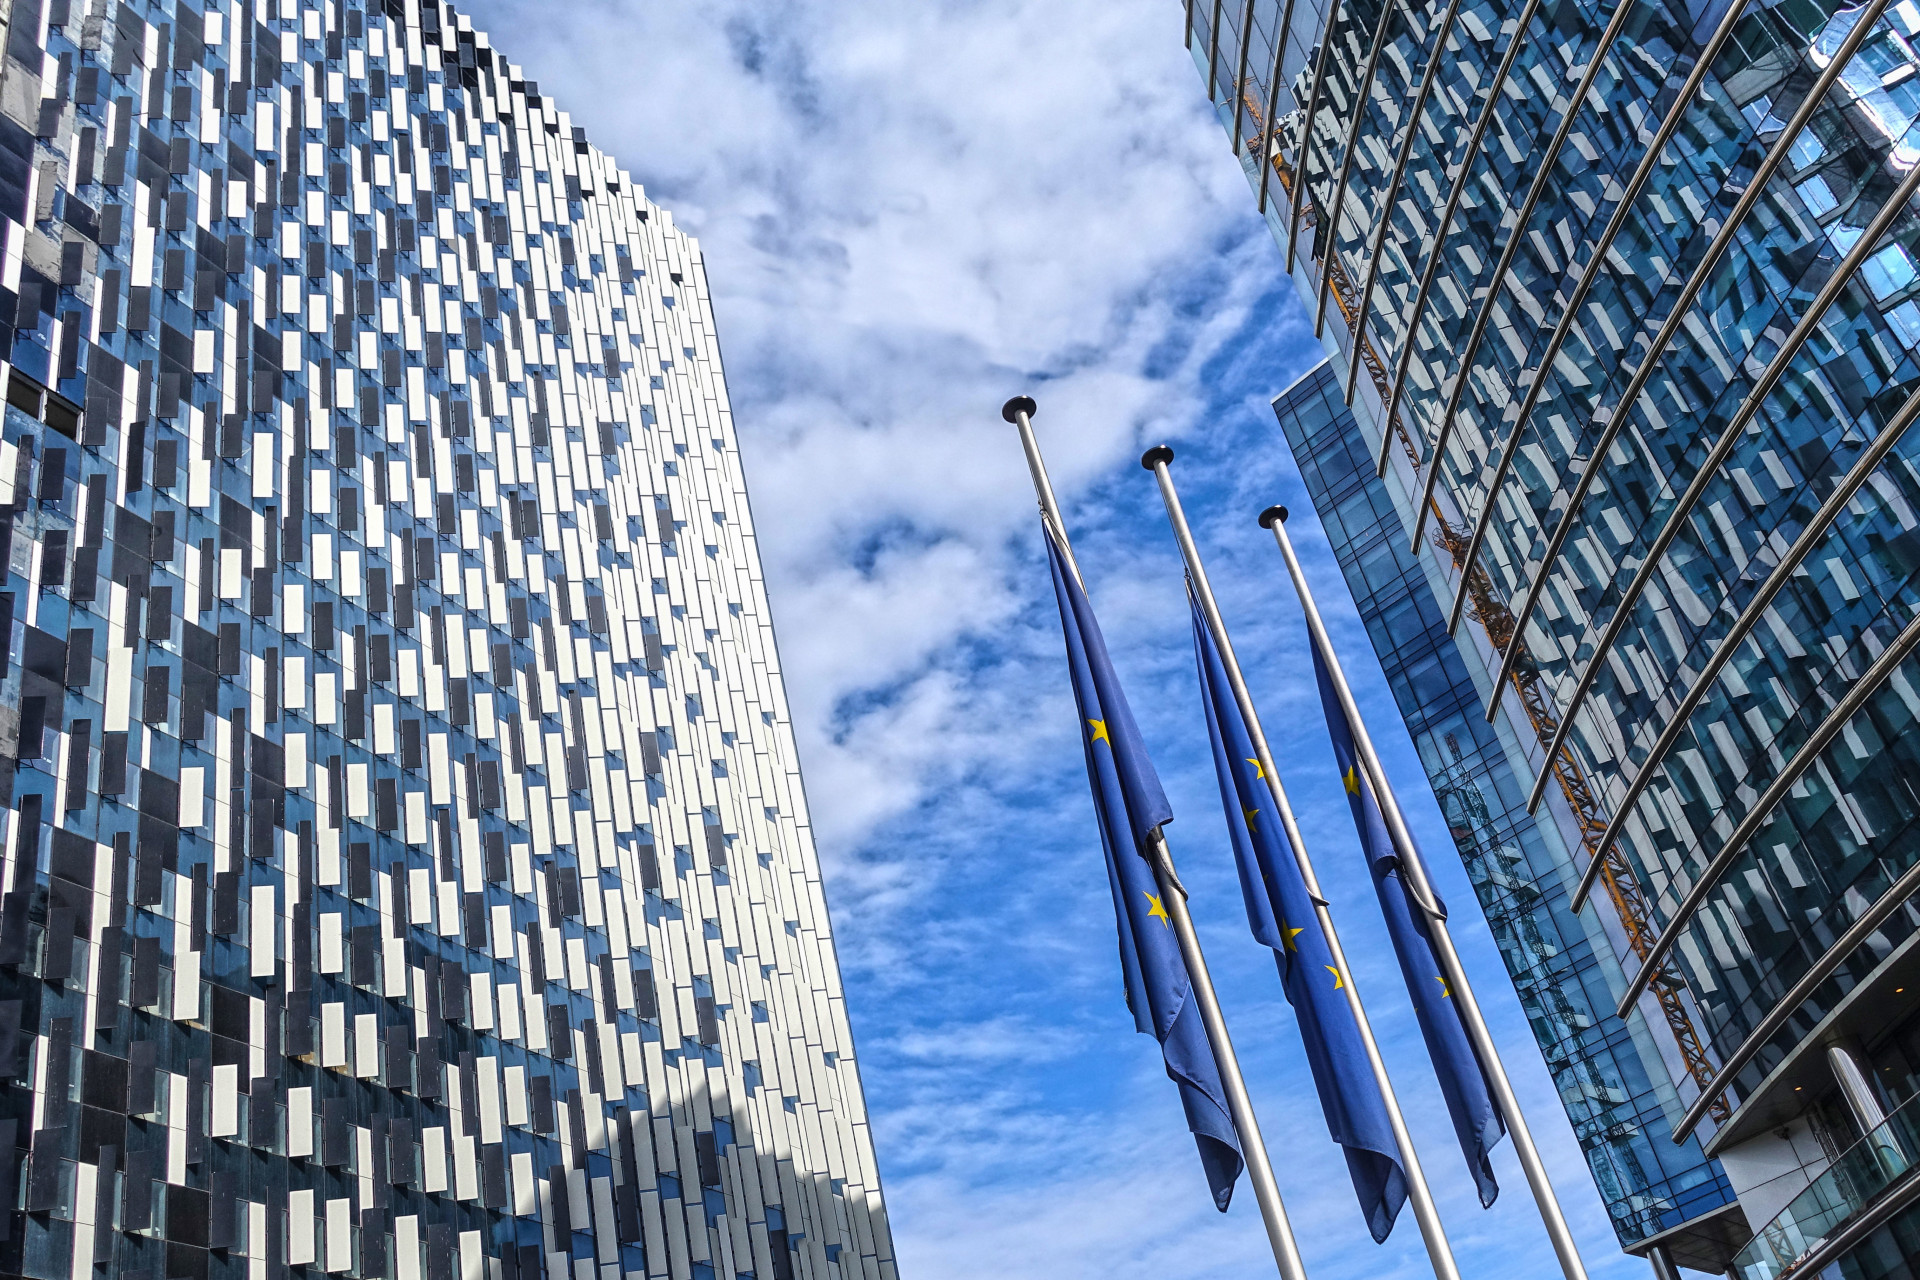 Let's start with the city of Brussels. Belgium's capital headquarters many institutions of the European Union. This means unique employment opportunities, as well as many other important advantages.<p><a href="https://www.msn.com/en-us/community/channel/vid-7xx8mnucu55yw63we9va2gwr7uihbxwc68fxqp25x6tg4ftibpra?cvid=94631541bc0f4f89bfd59158d696ad7e">Follow us and access great exclusive content every day</a></p>